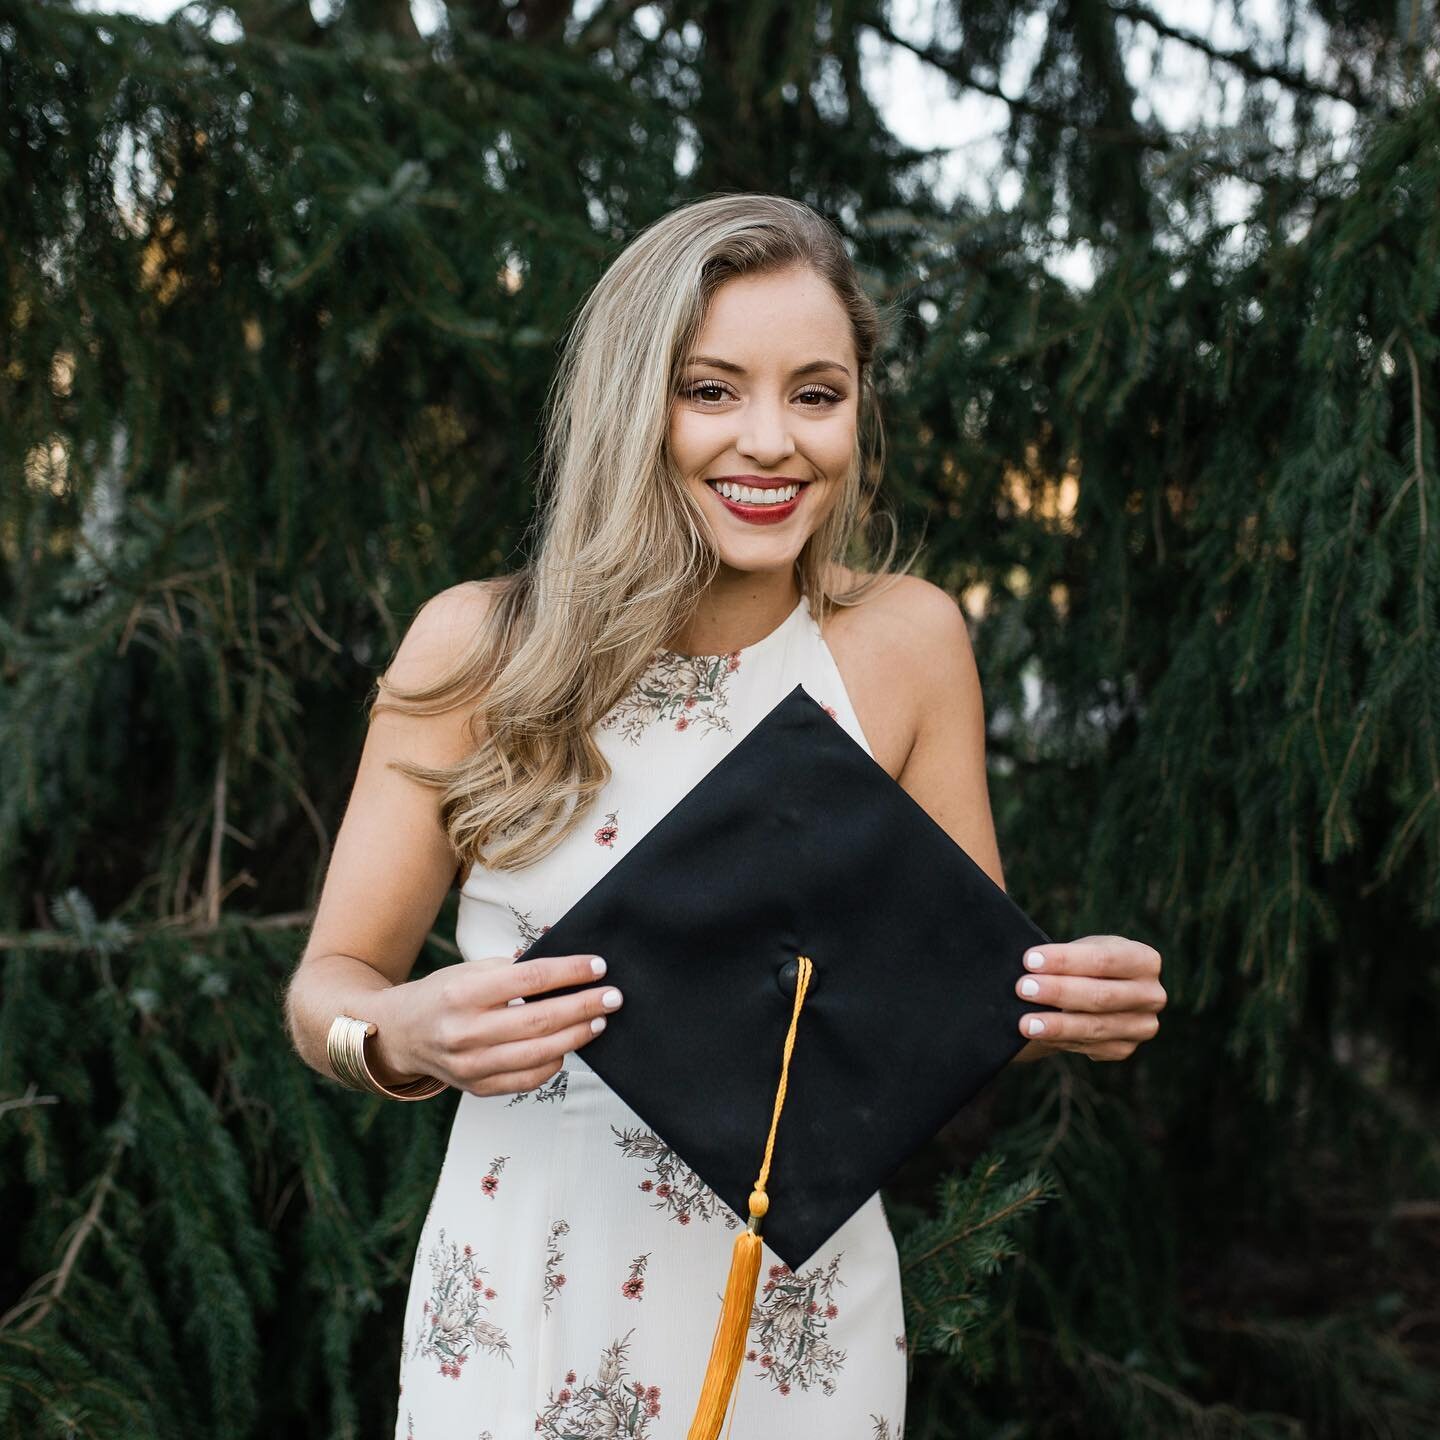 Hey! Are you a recent grad or do you know a 2021 graduate in need of photos? Tag them here or share this post with them! We can pop some bubbly (or Bubly....) and take a few photos in and out of your grad gown!

Offering some friendly rates for shoot